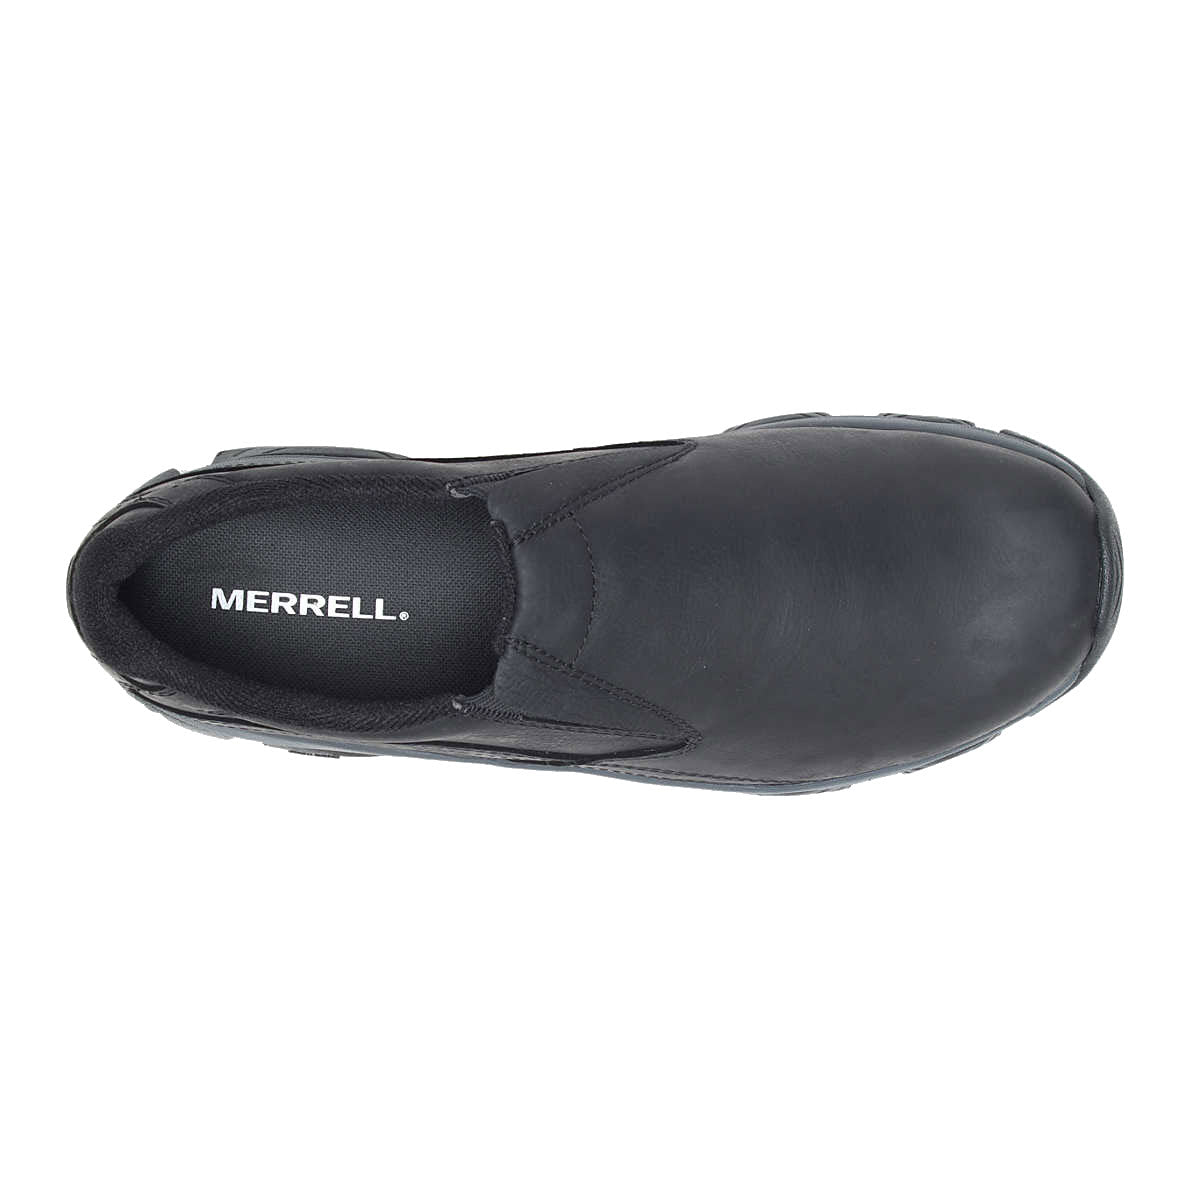 Top view of a black Merrell Moab Adventure 3 Moc slip-on shoe showing the Merrell brand name on the insole.